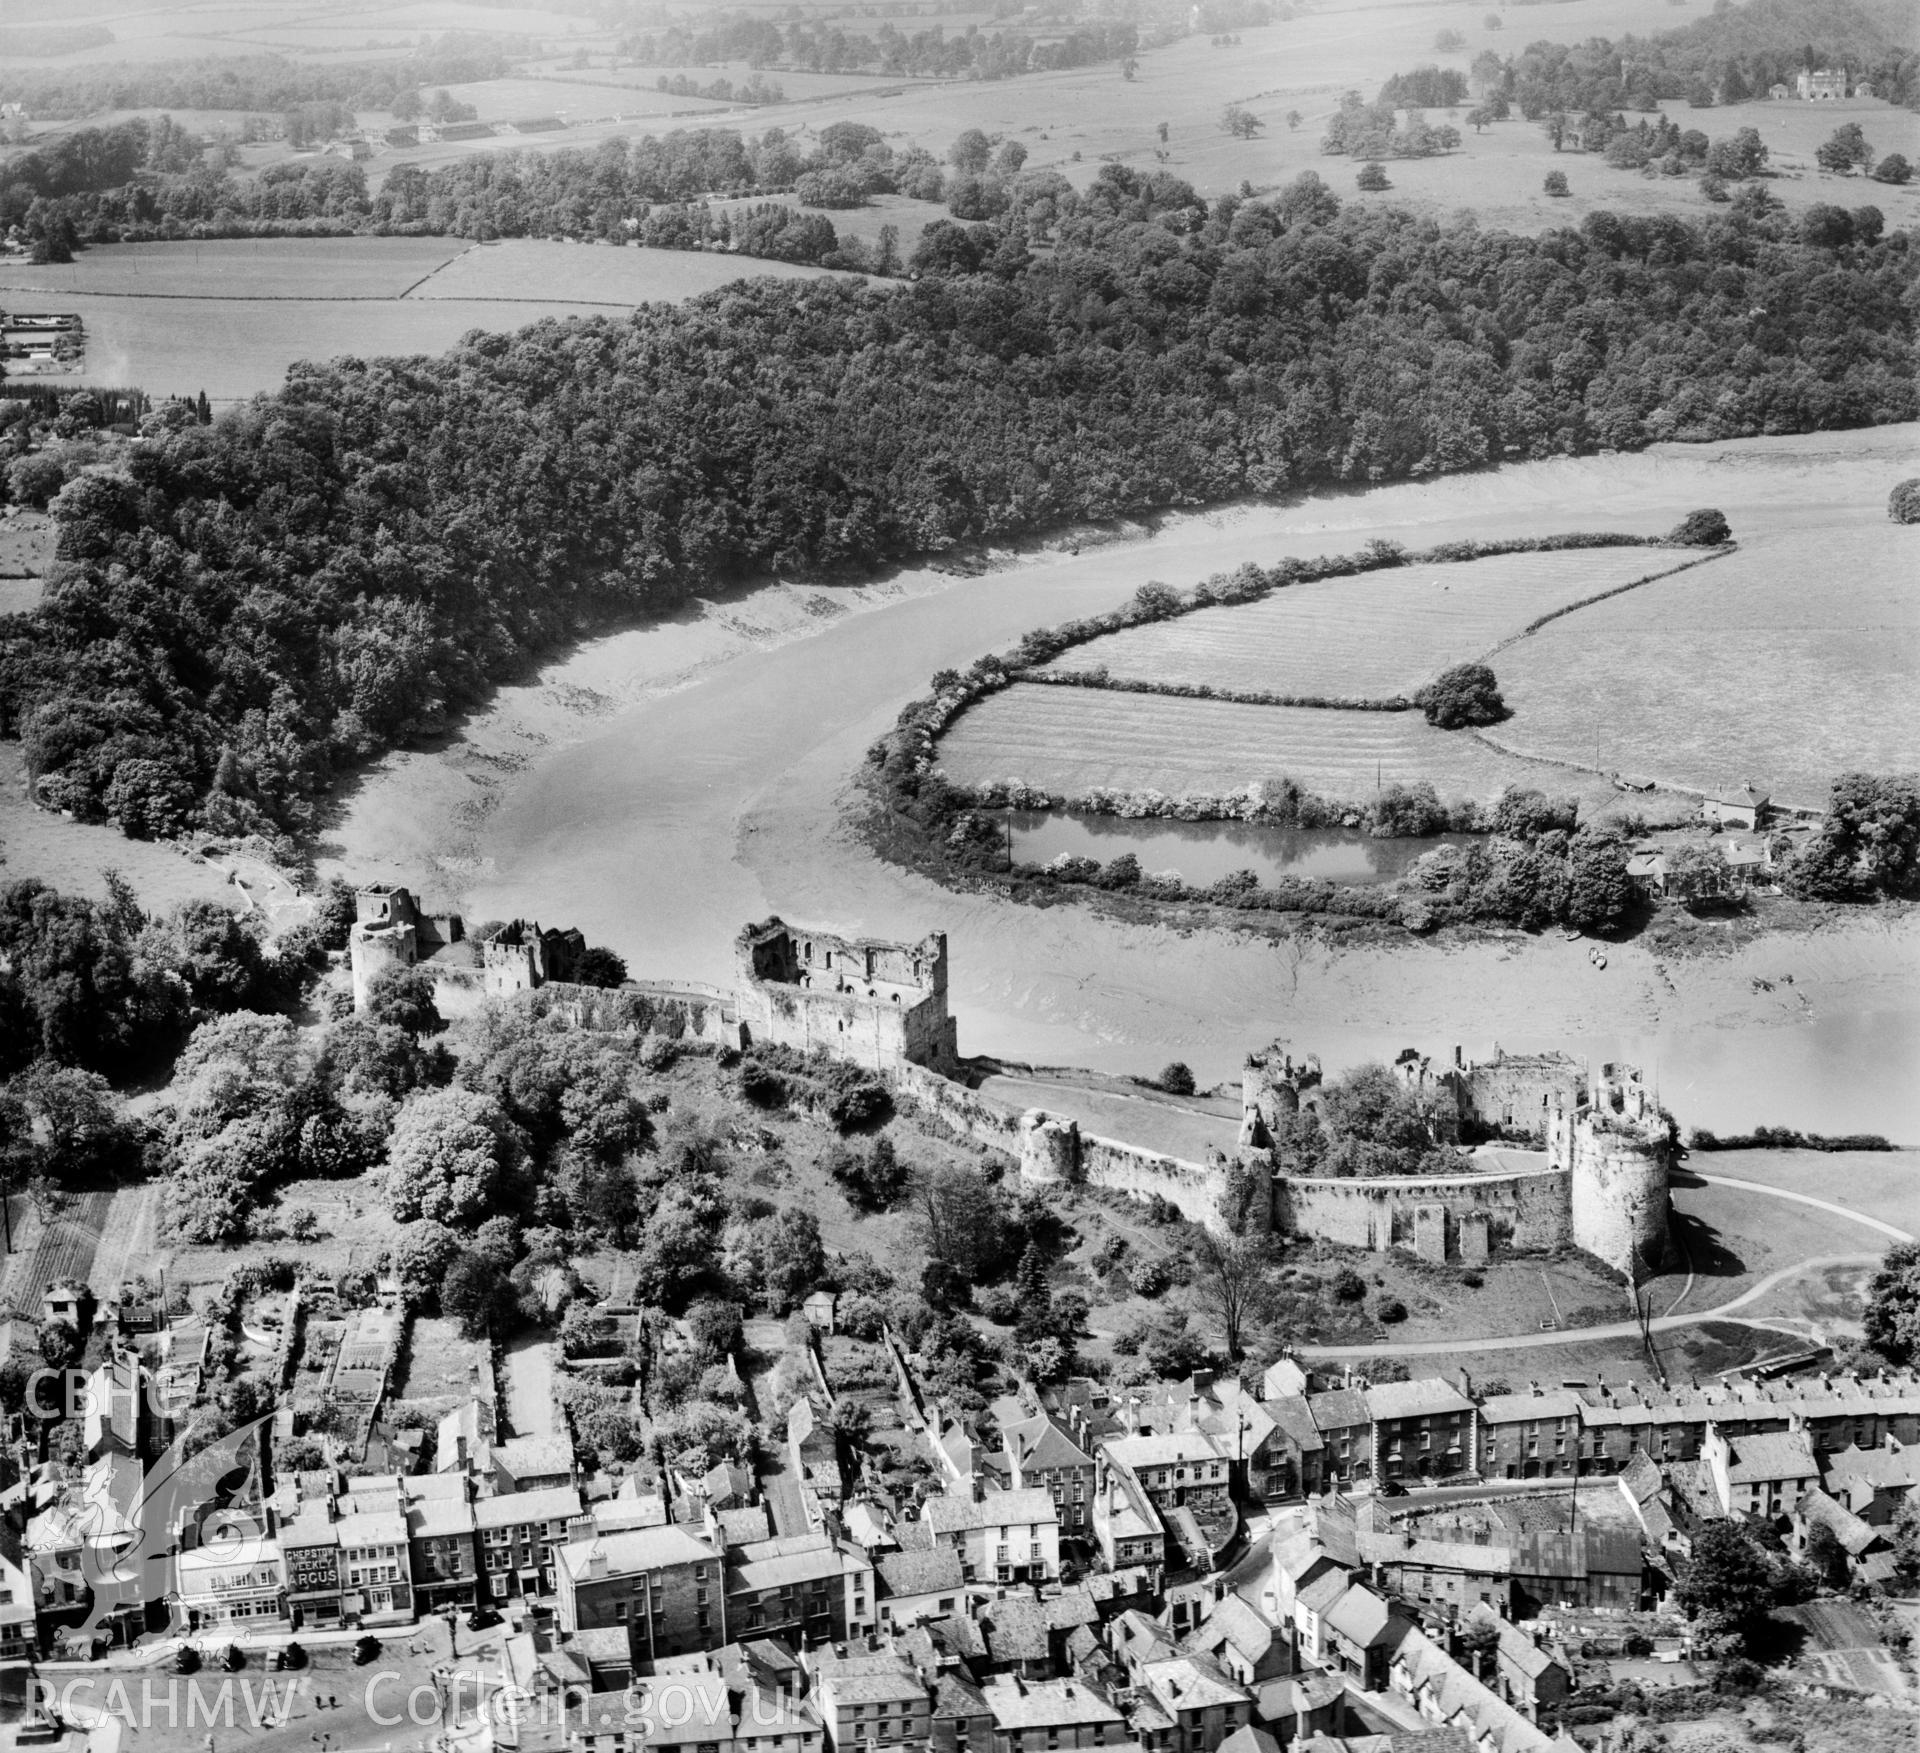 View of Chepstow showing castle